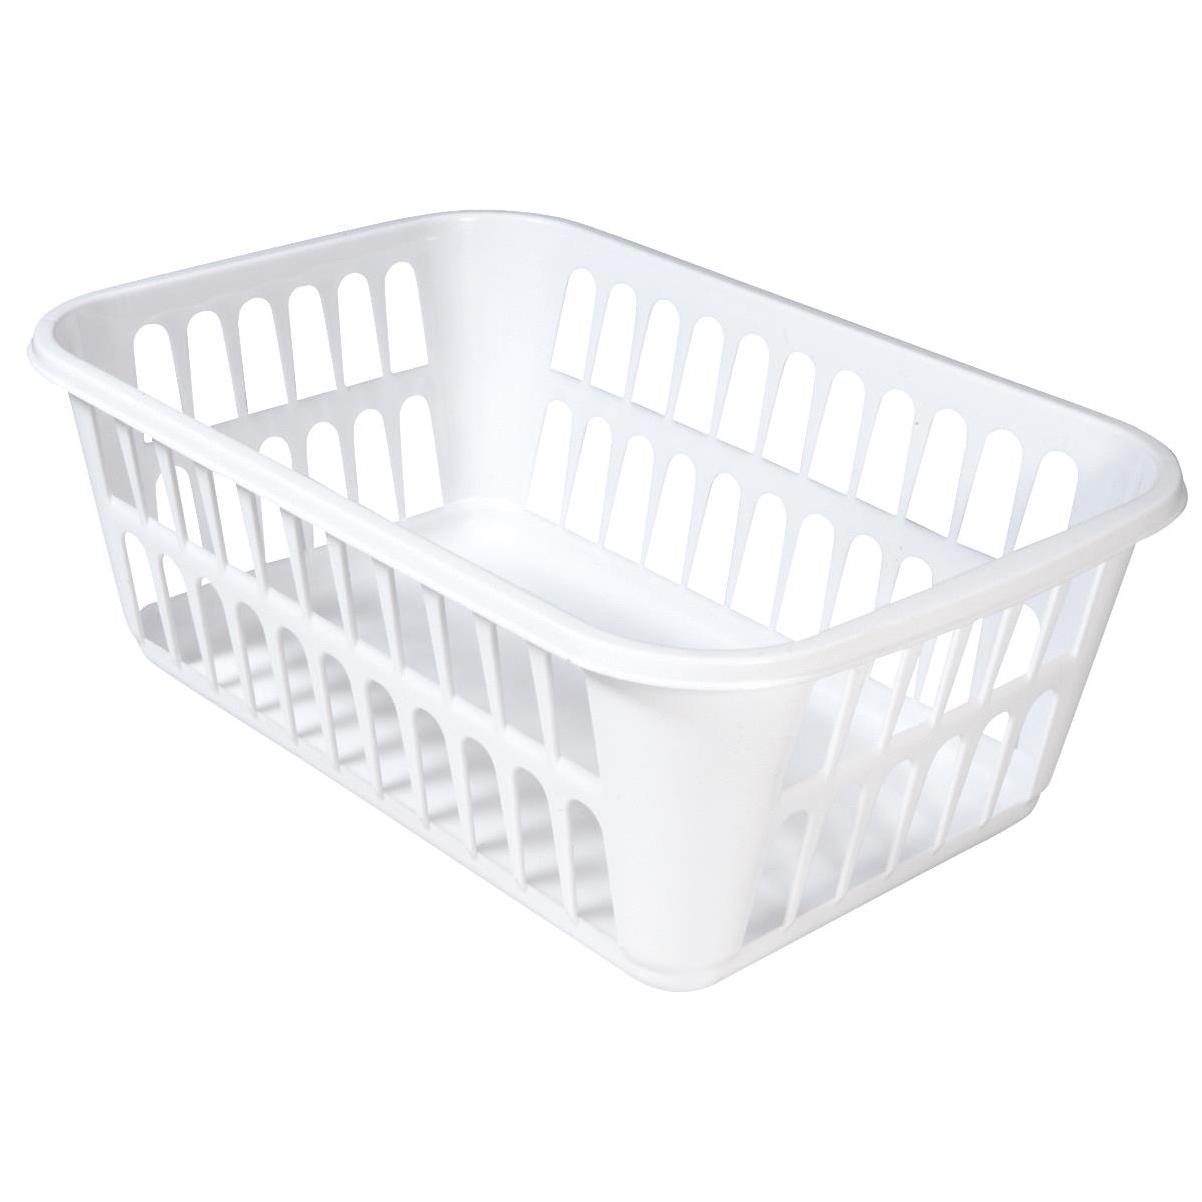 Rubbermaid Drawer Organizer, 9 by 6 by 2-Inch, White FG2916RDWHT 